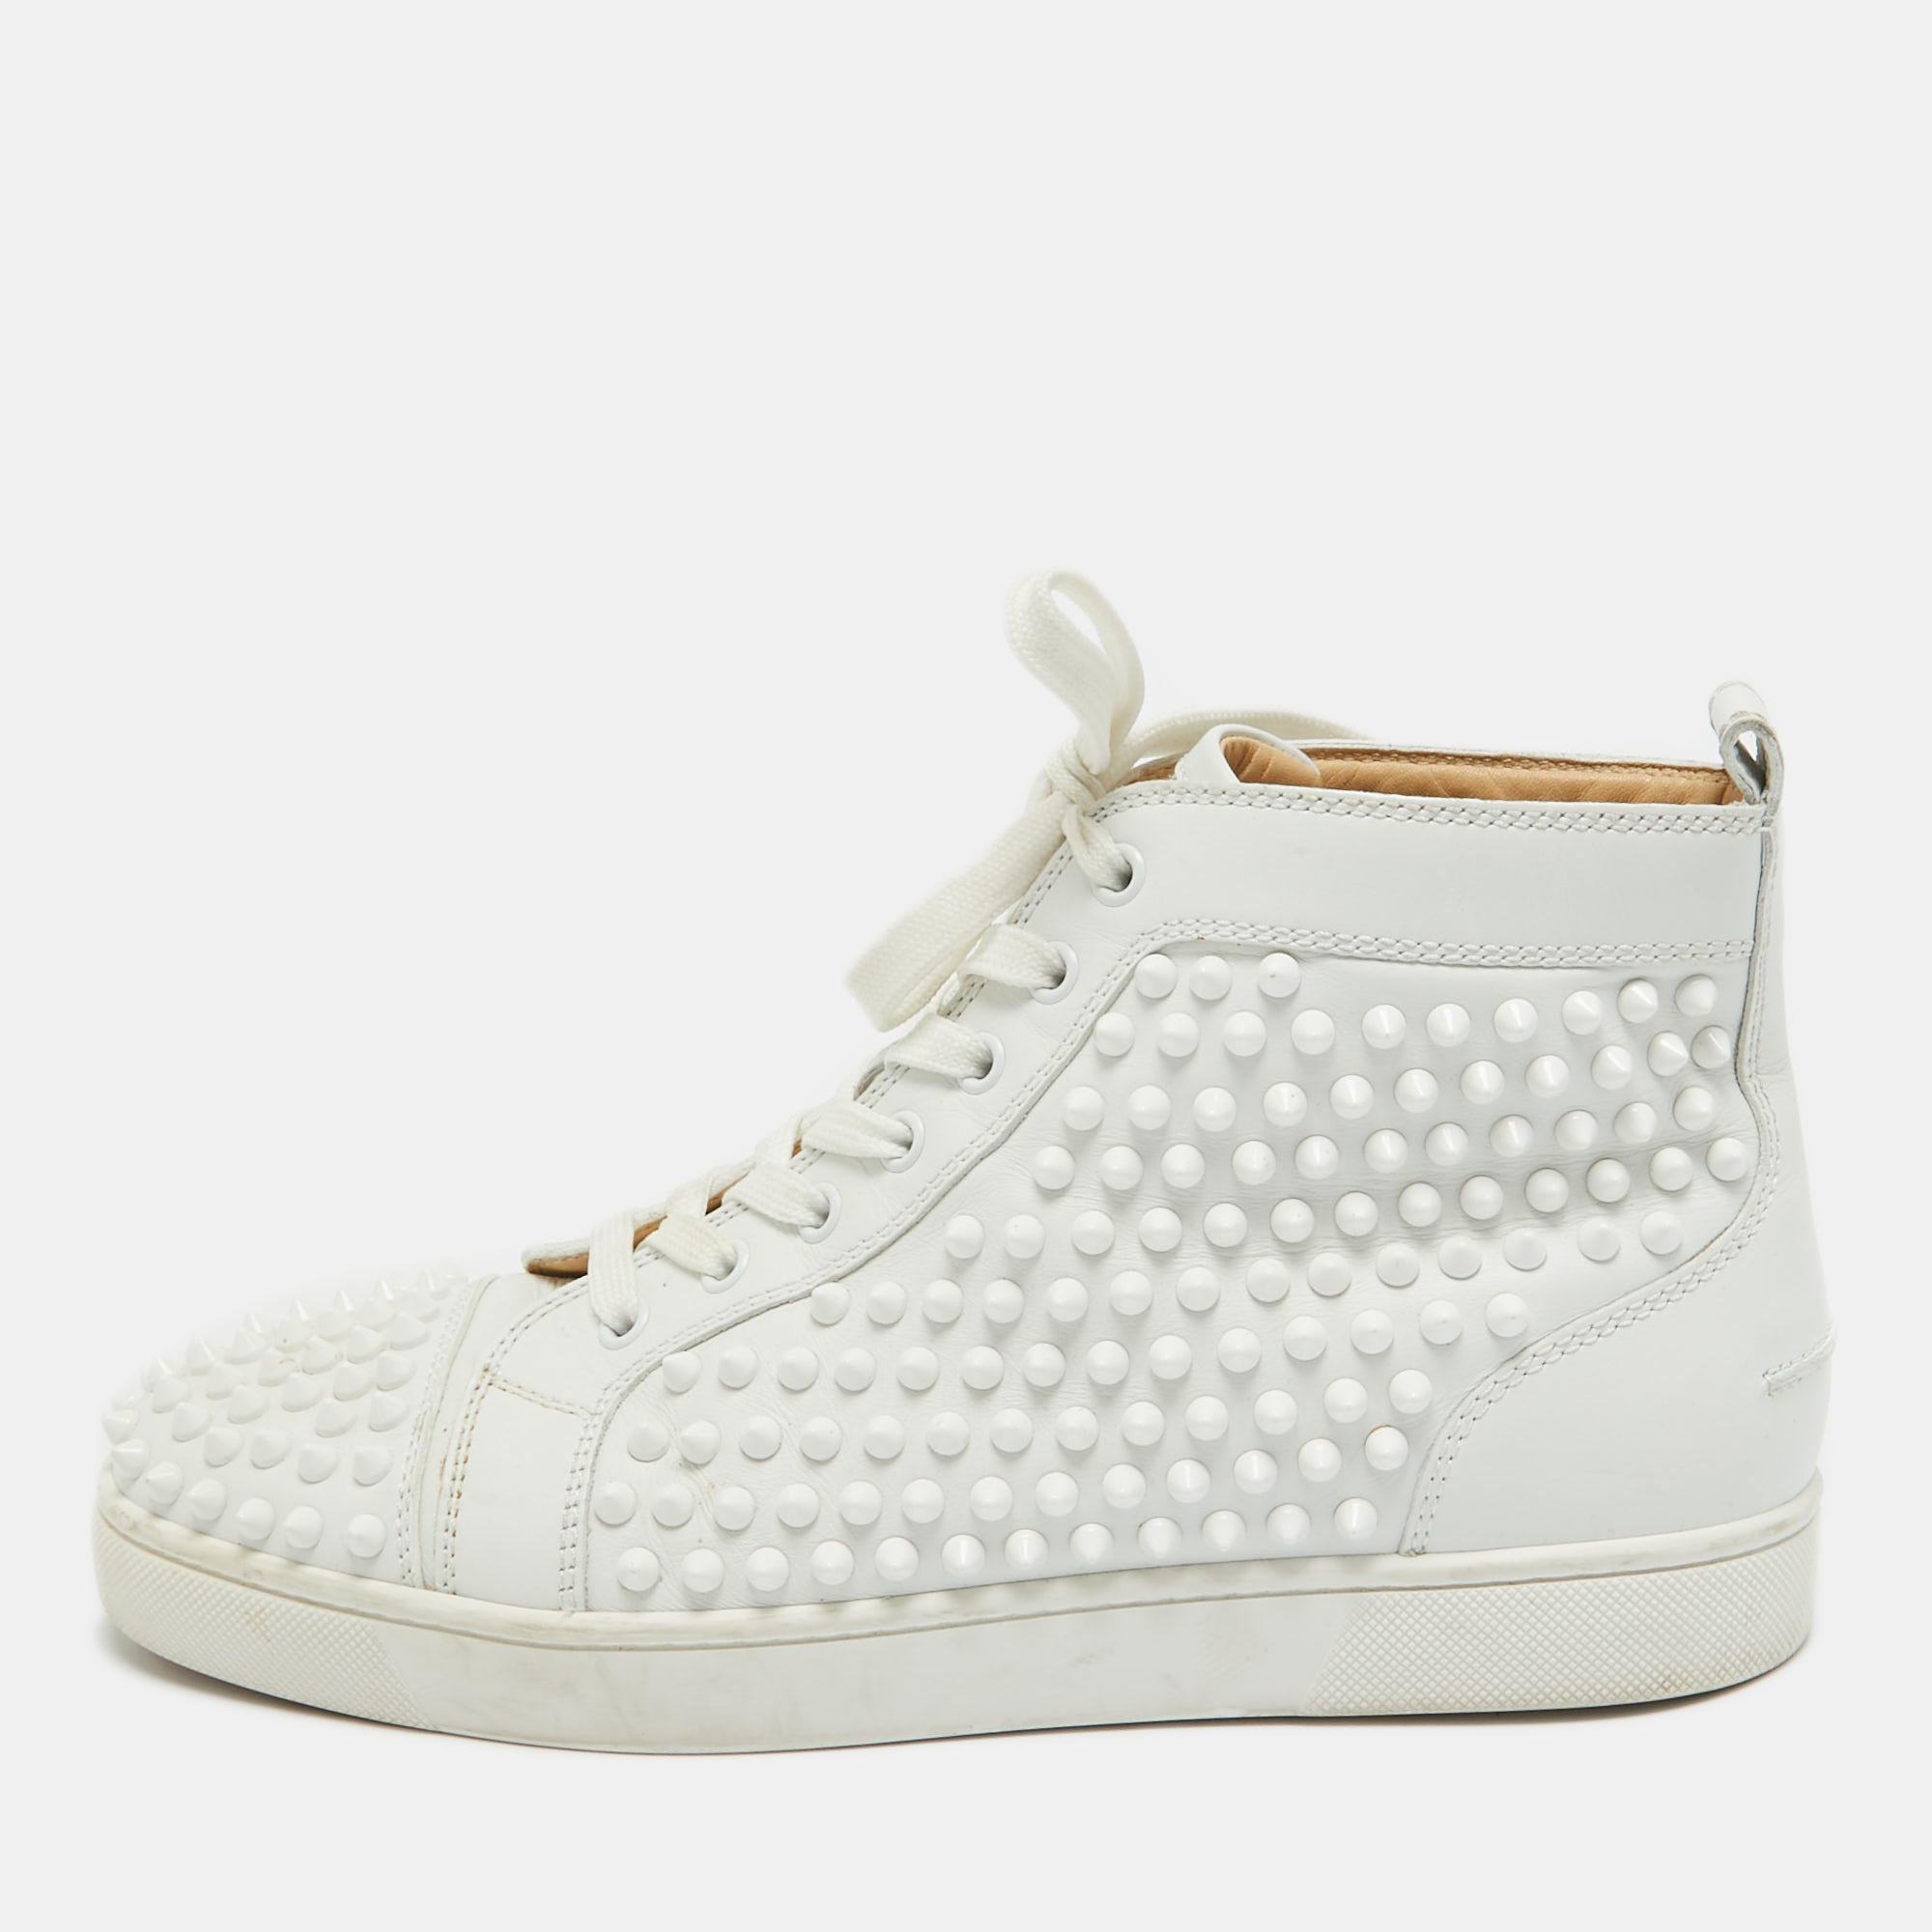 Pre-owned Christian Louboutin White Leather Louis Spikes High Top Trainers Size 40.5